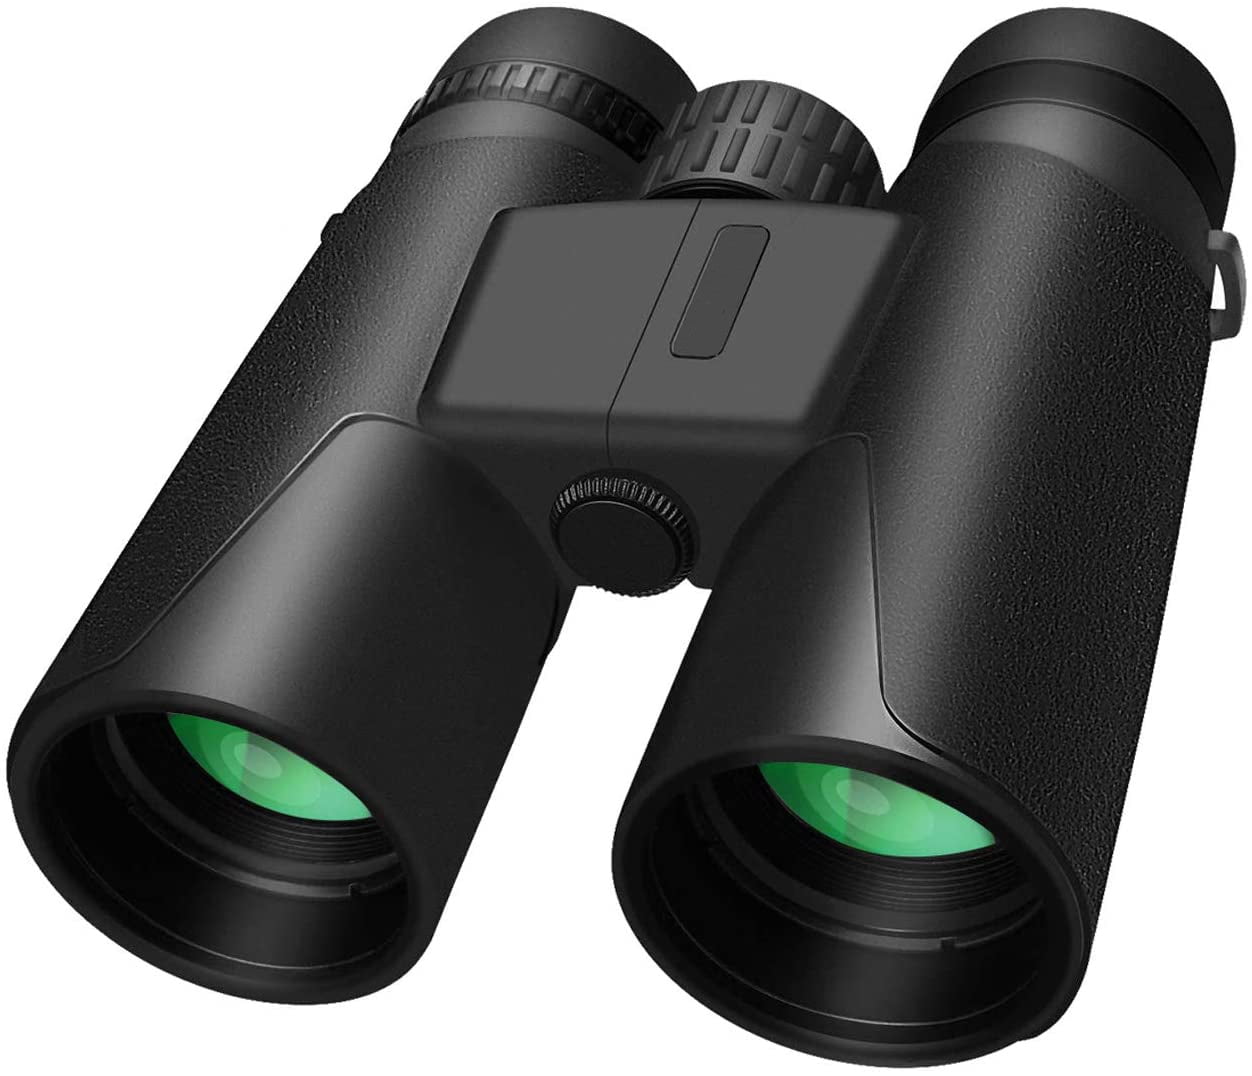 Also Fit for Kids Outdoor Hunting 10X42 Binoculars for Adults,HD Optics BAK4 Roof Prism FMC Fully Coated Lens with Neck Strap/Carrying Binocular Large Eyepiece Watching Travelling Sports Hiking 